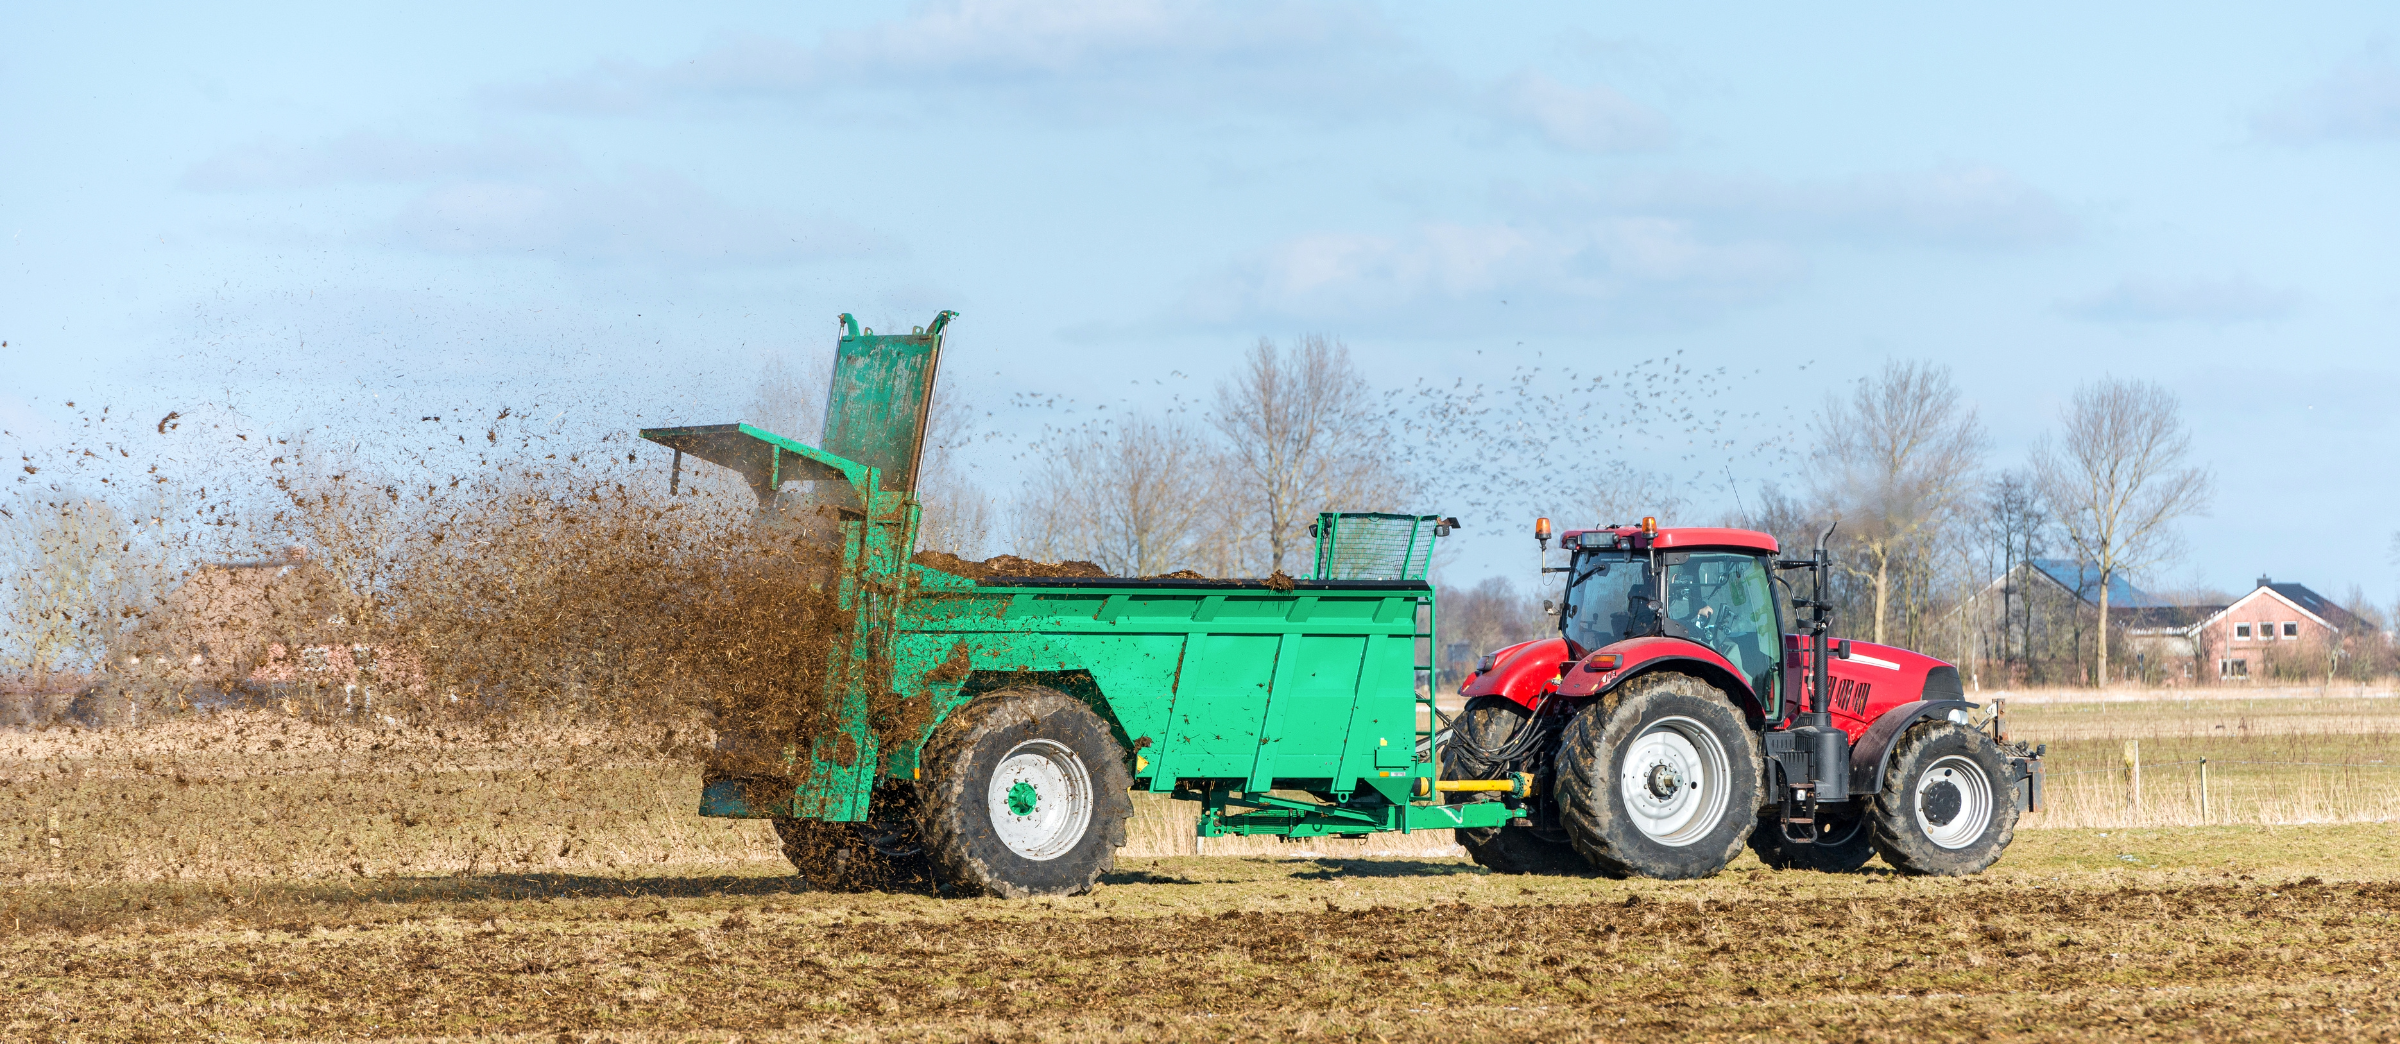 Tractor with manure/litter spreader on the field